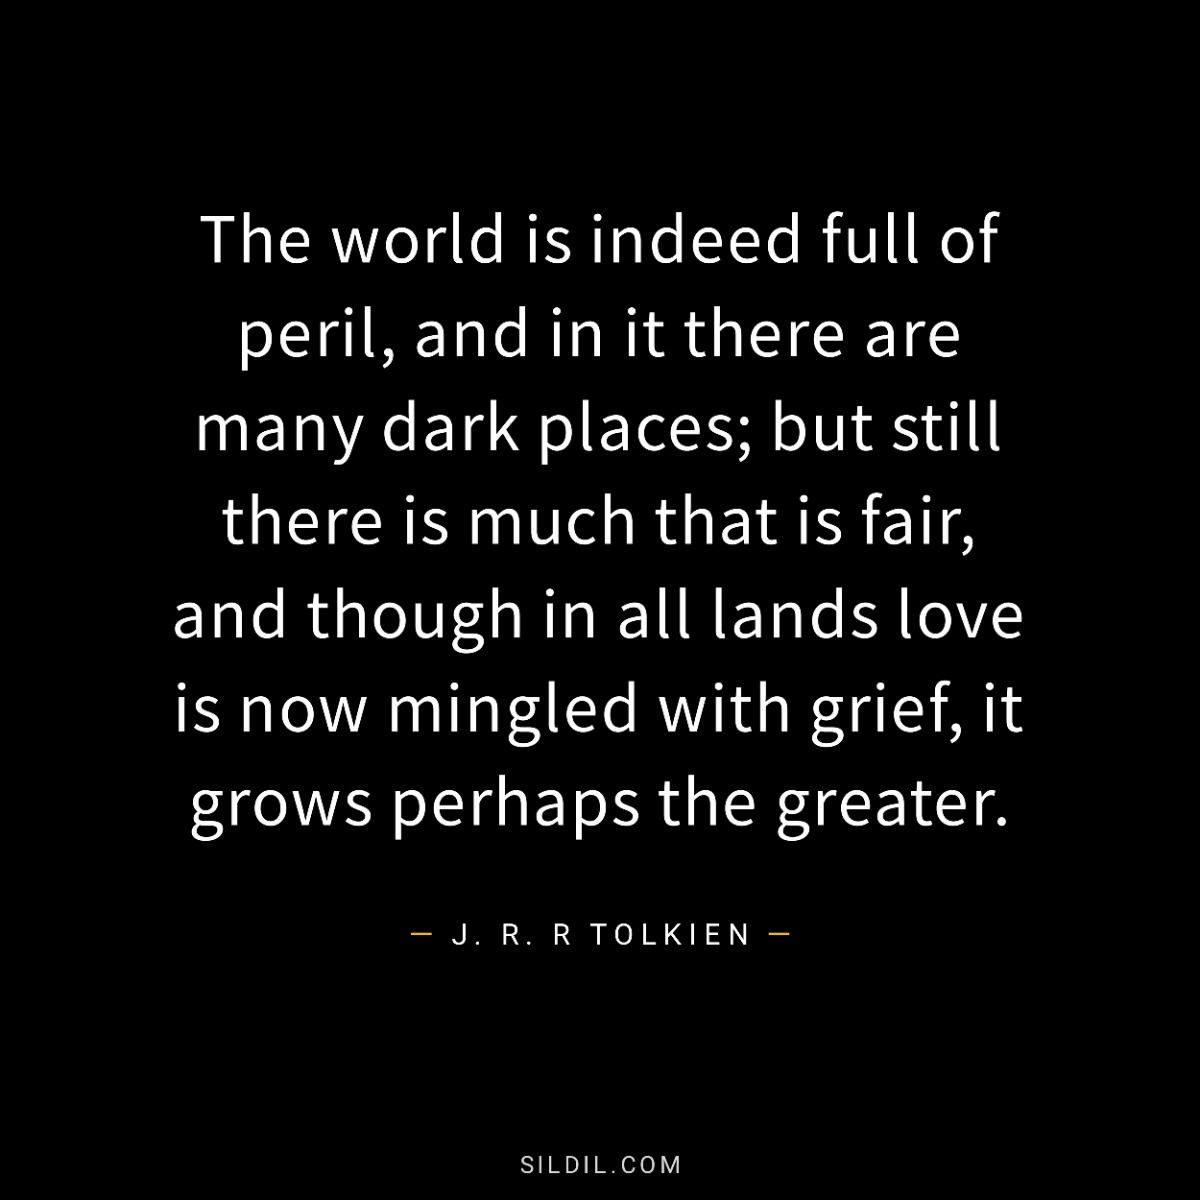 The world is indeed full of peril, and in it there are many dark places; but still there is much that is fair, and though in all lands love is now mingled with grief, it grows perhaps the greater.